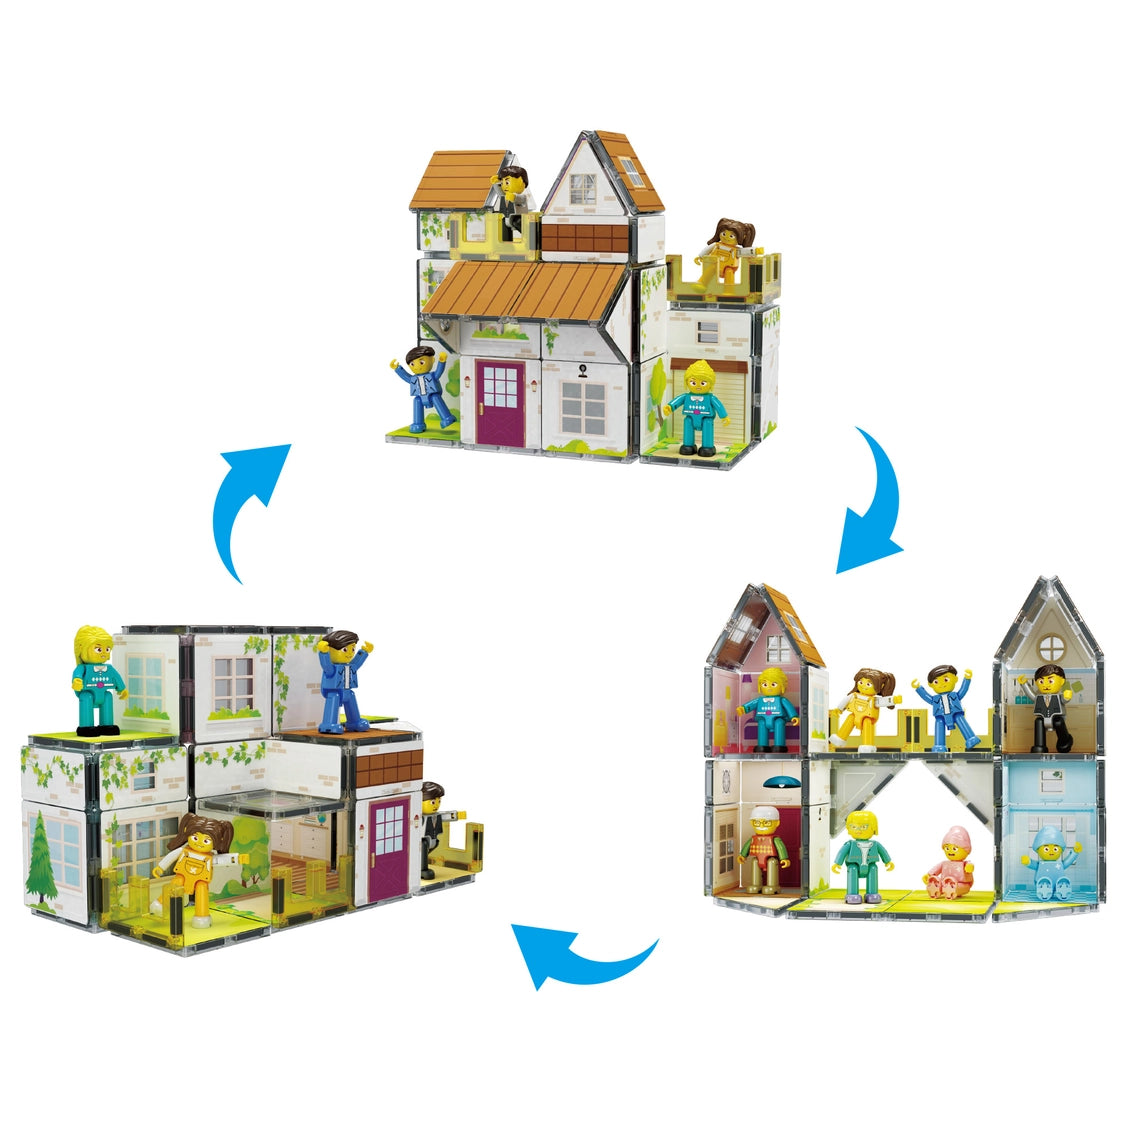 Picasso Magnet Tile Playset Family House with Characters